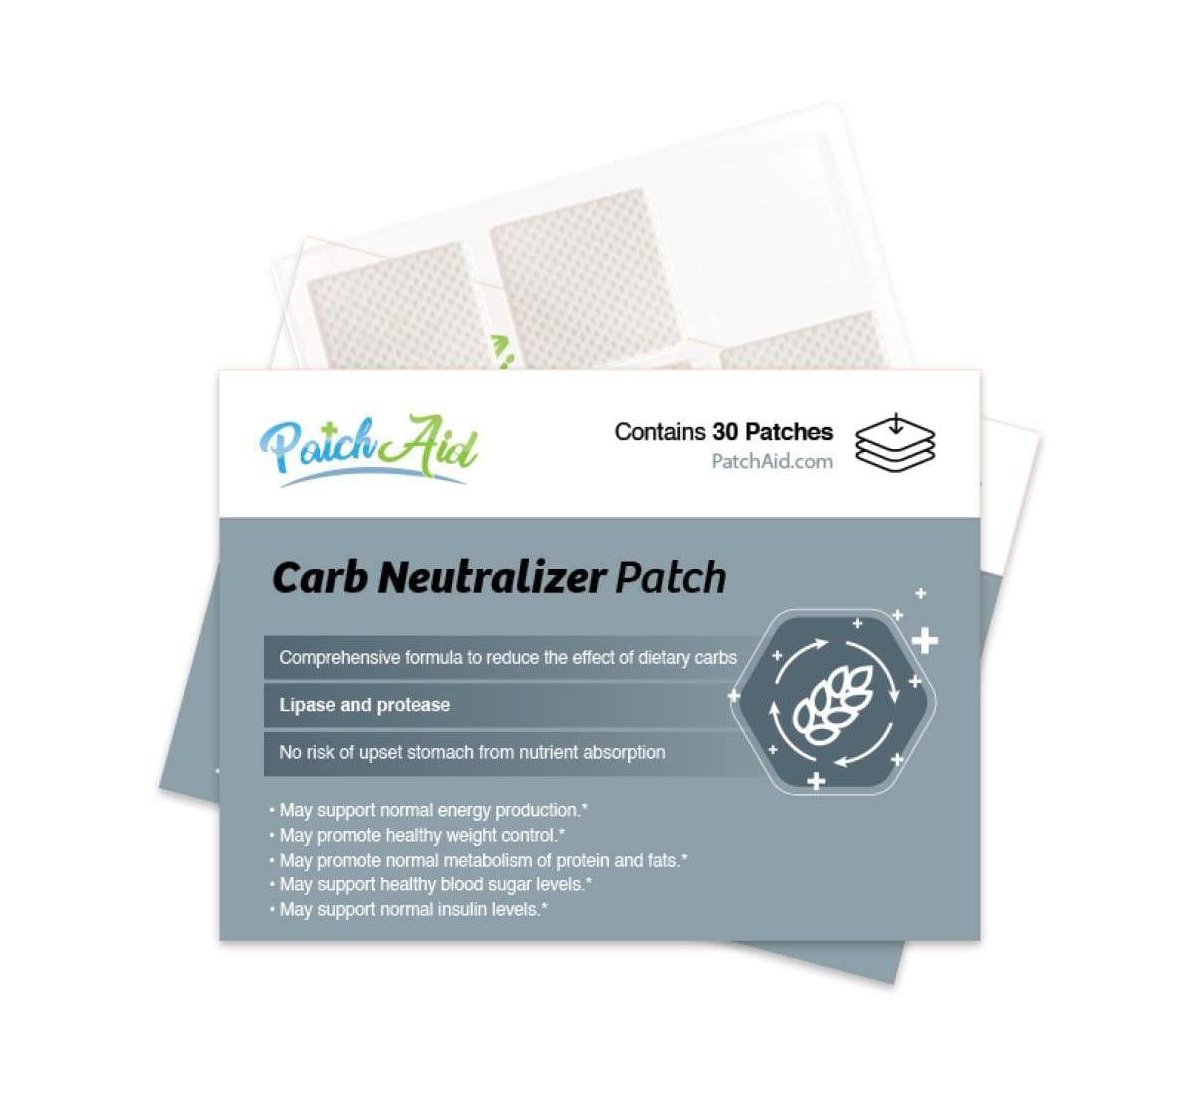 Carb Neutralizer Patch by PatchAid (30-Day Supply) - White